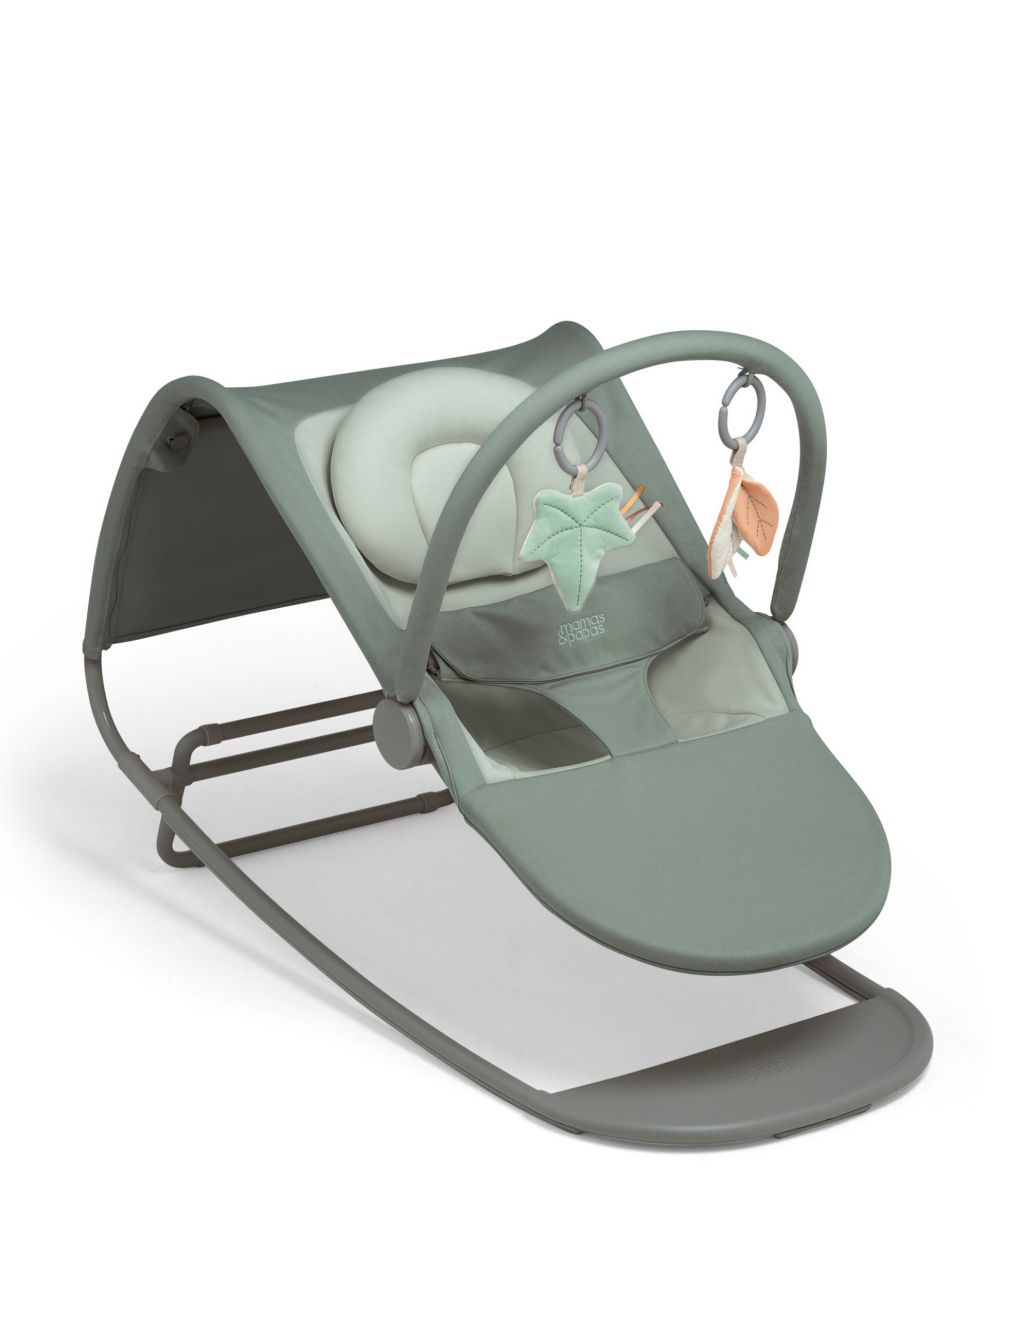 Tempo 3-in-1 Rocker Ivy Bouncer image 5